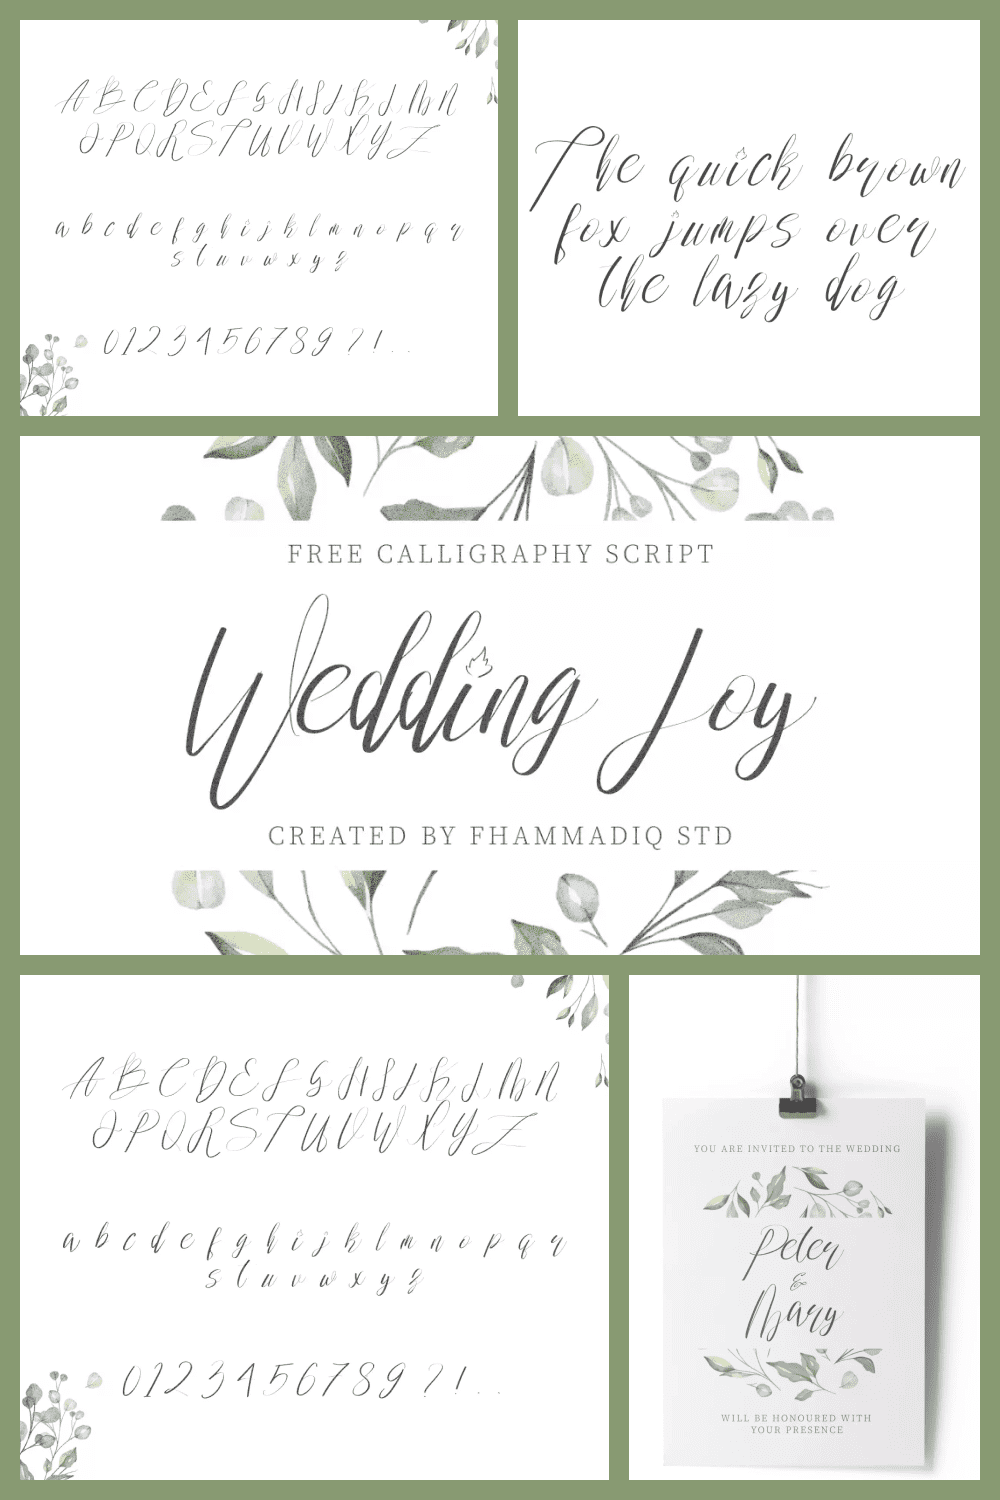 Calligraphic wedding font on green background with flowers.